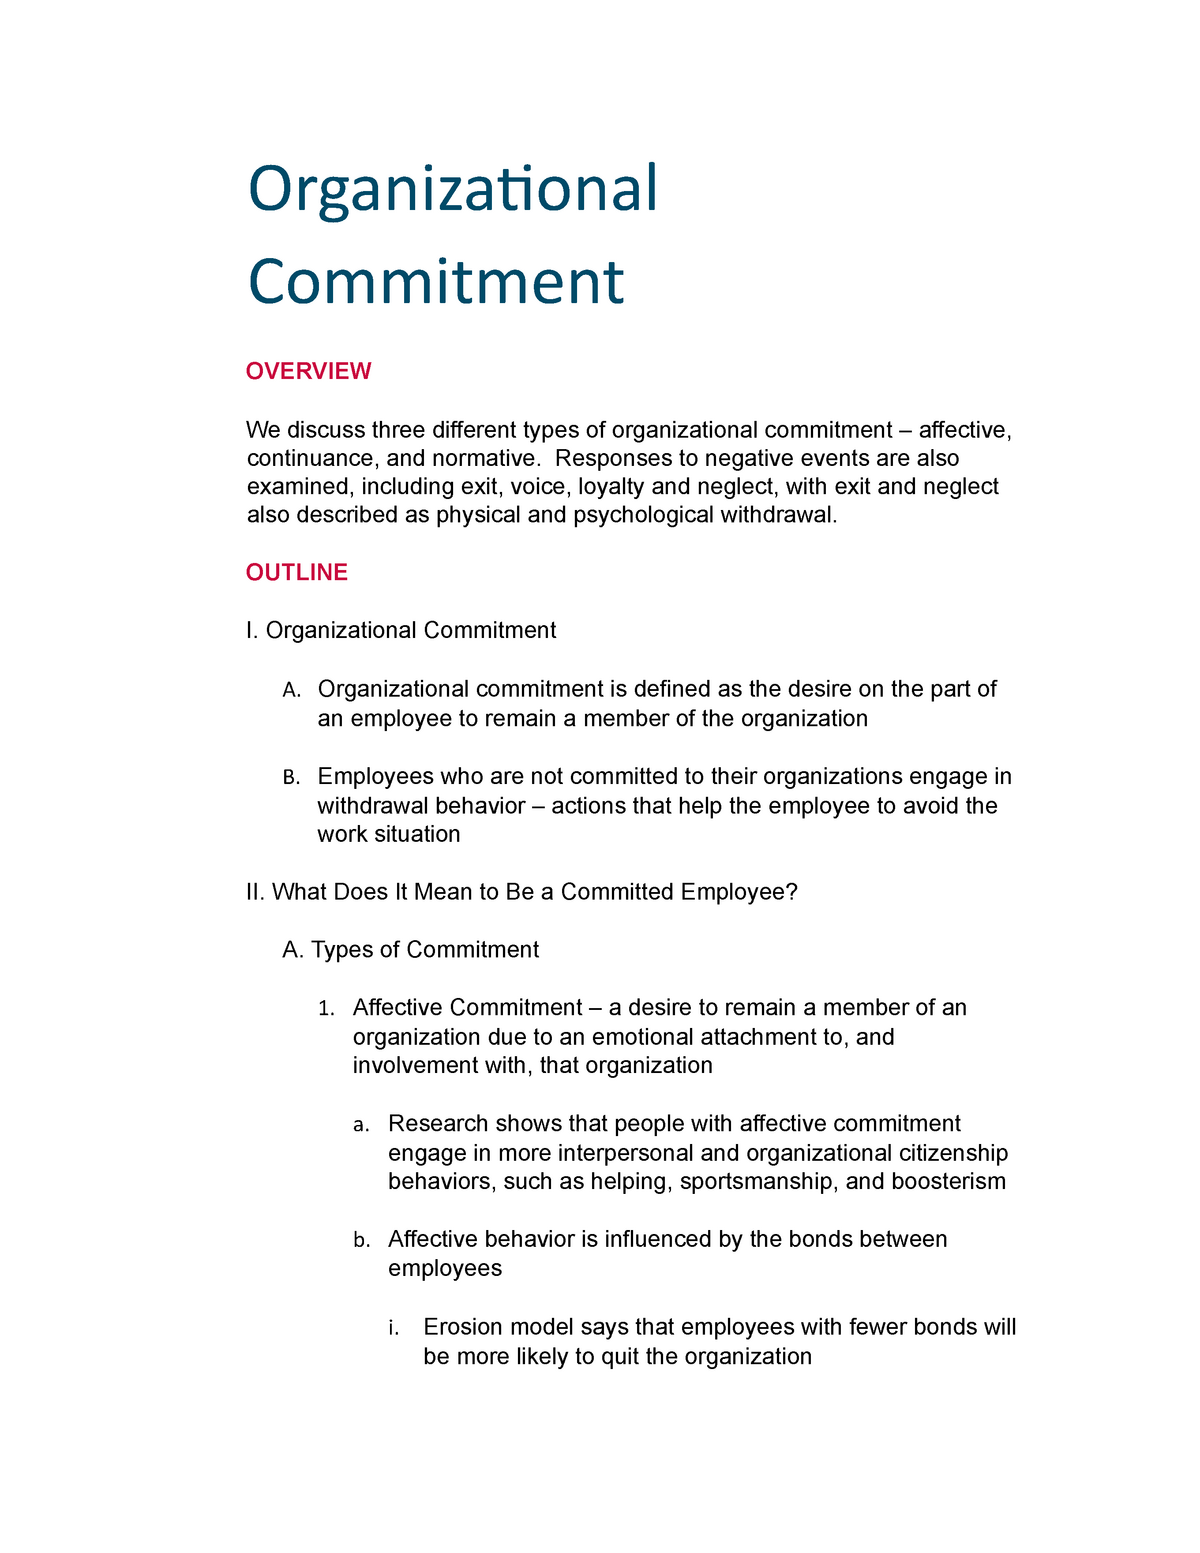 essay on commitment in an organization